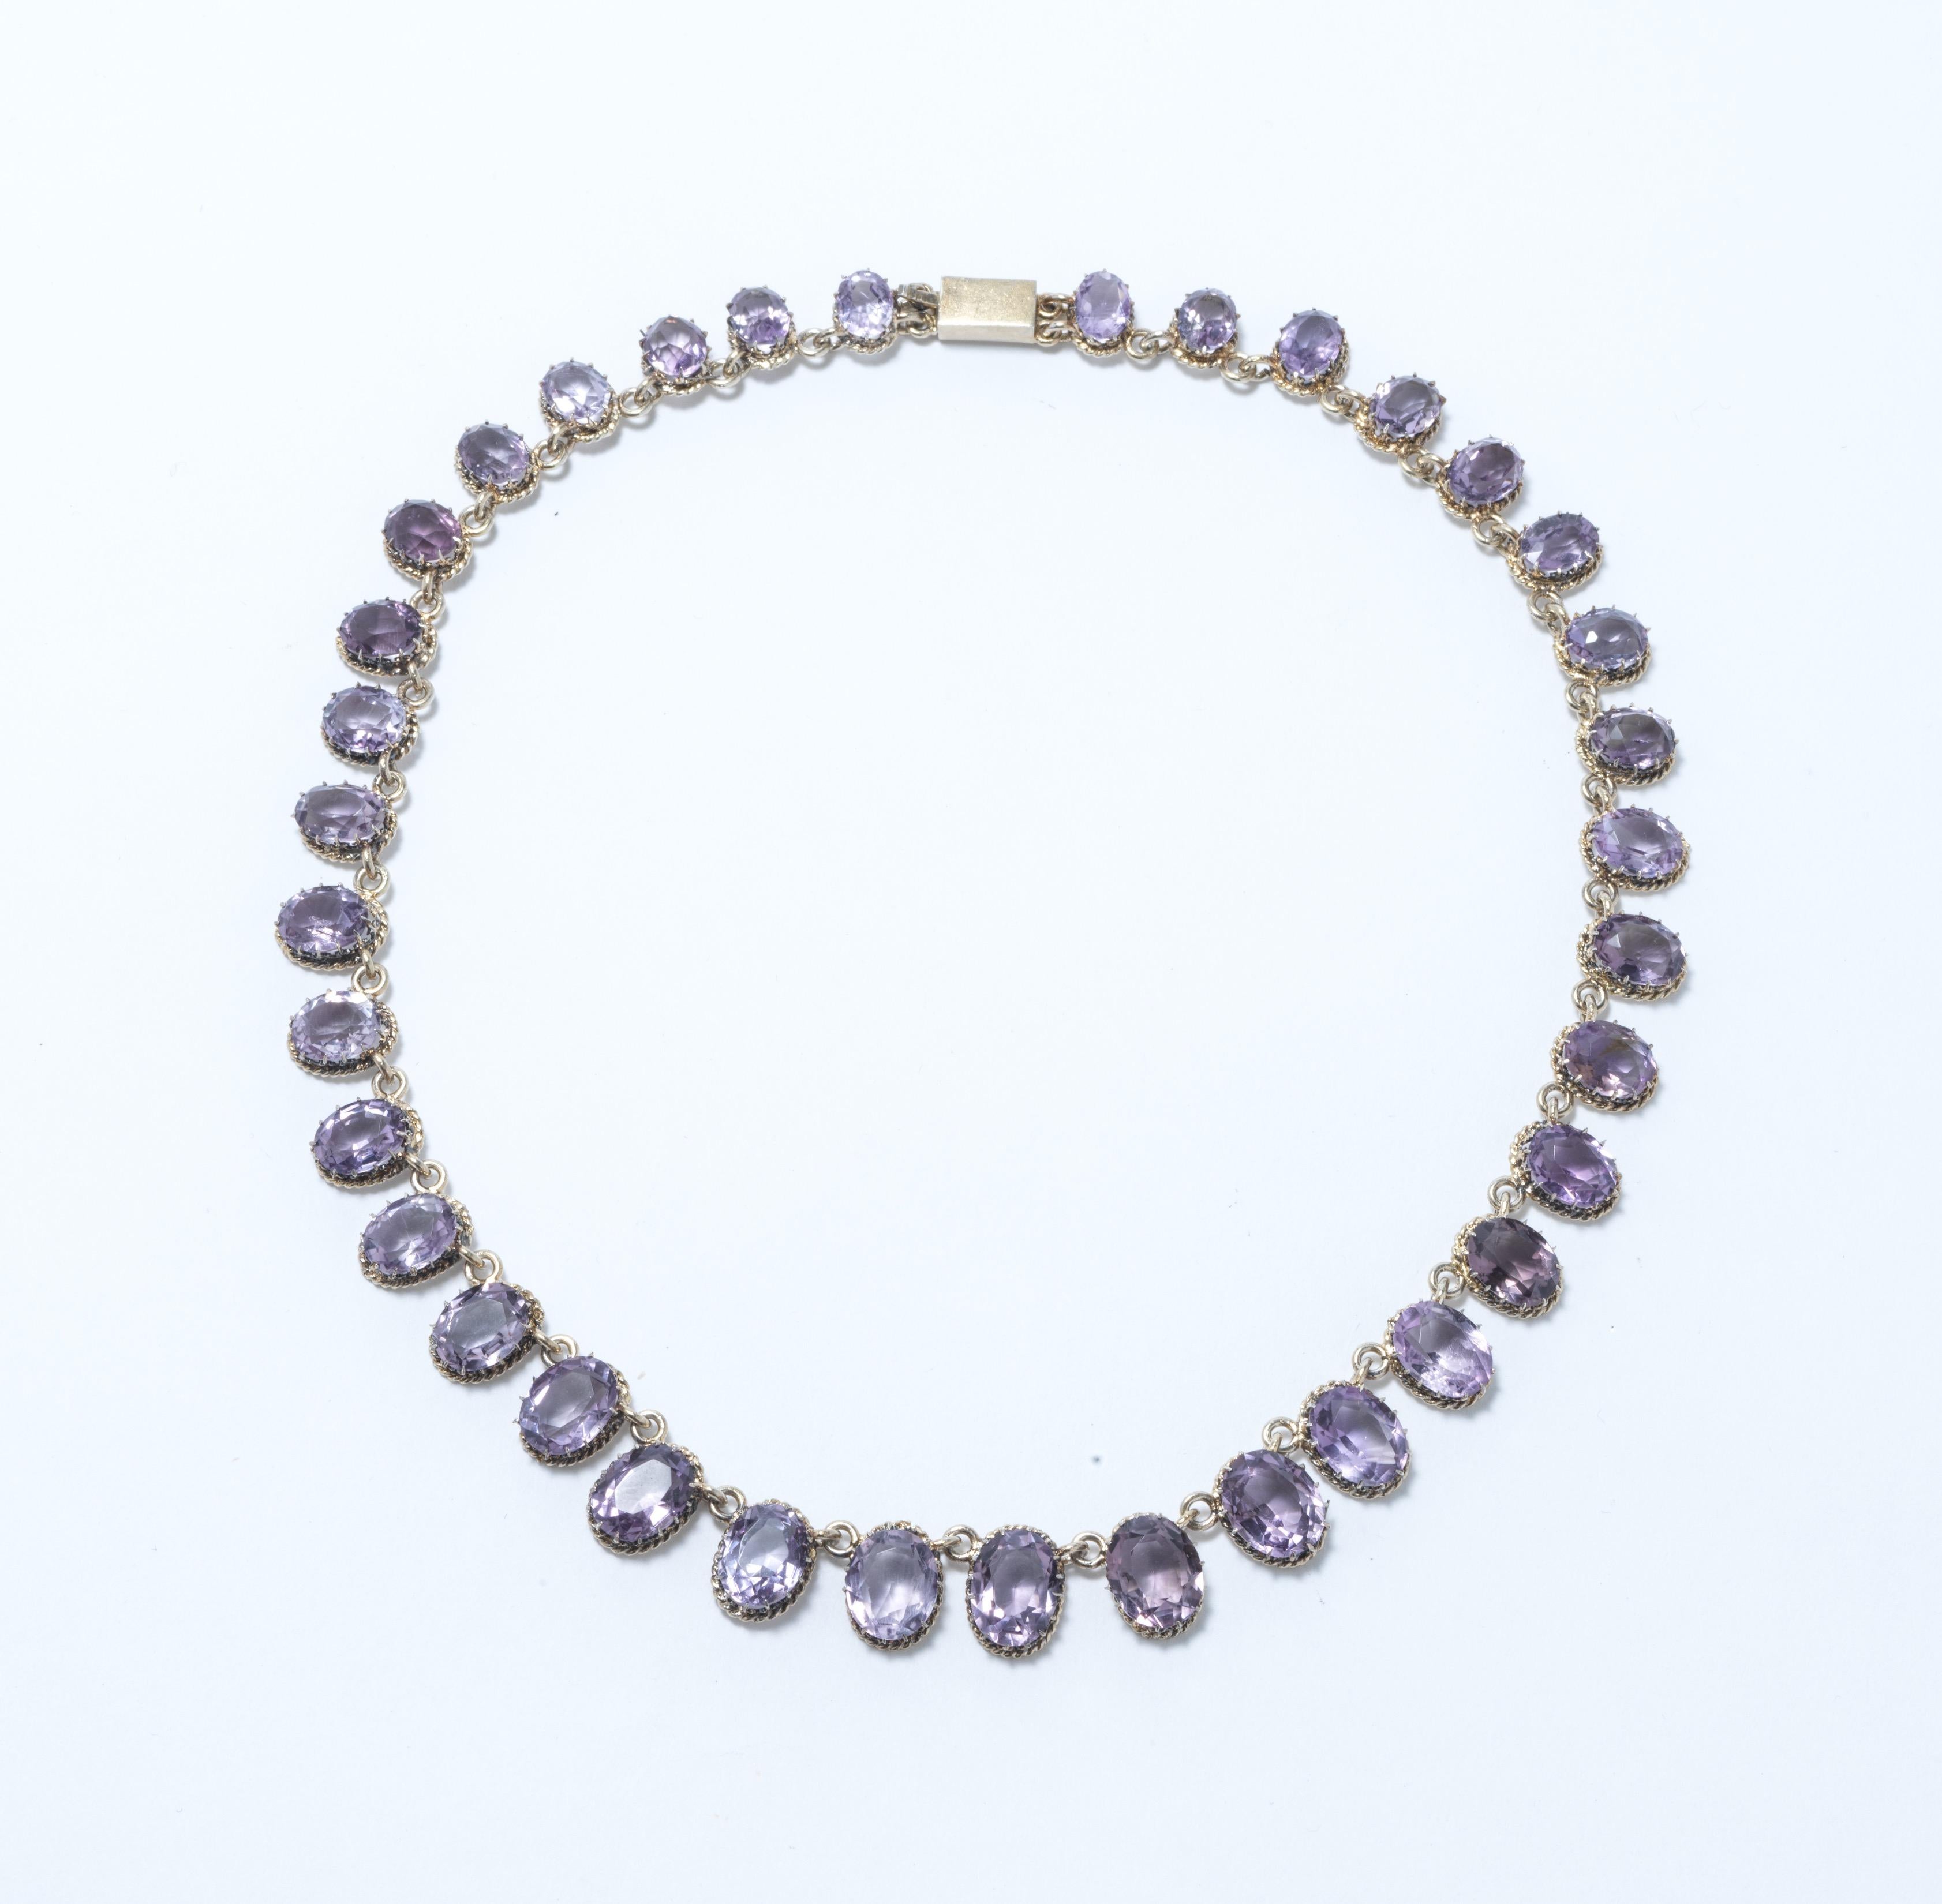 A beautiful antique necklace made in the second half of the 19th c. It is made of gilt silver and has 36 amethysts going from smaller to larger and then smaller again. The design of the necklace is simple but just so elegant. This is a piece that